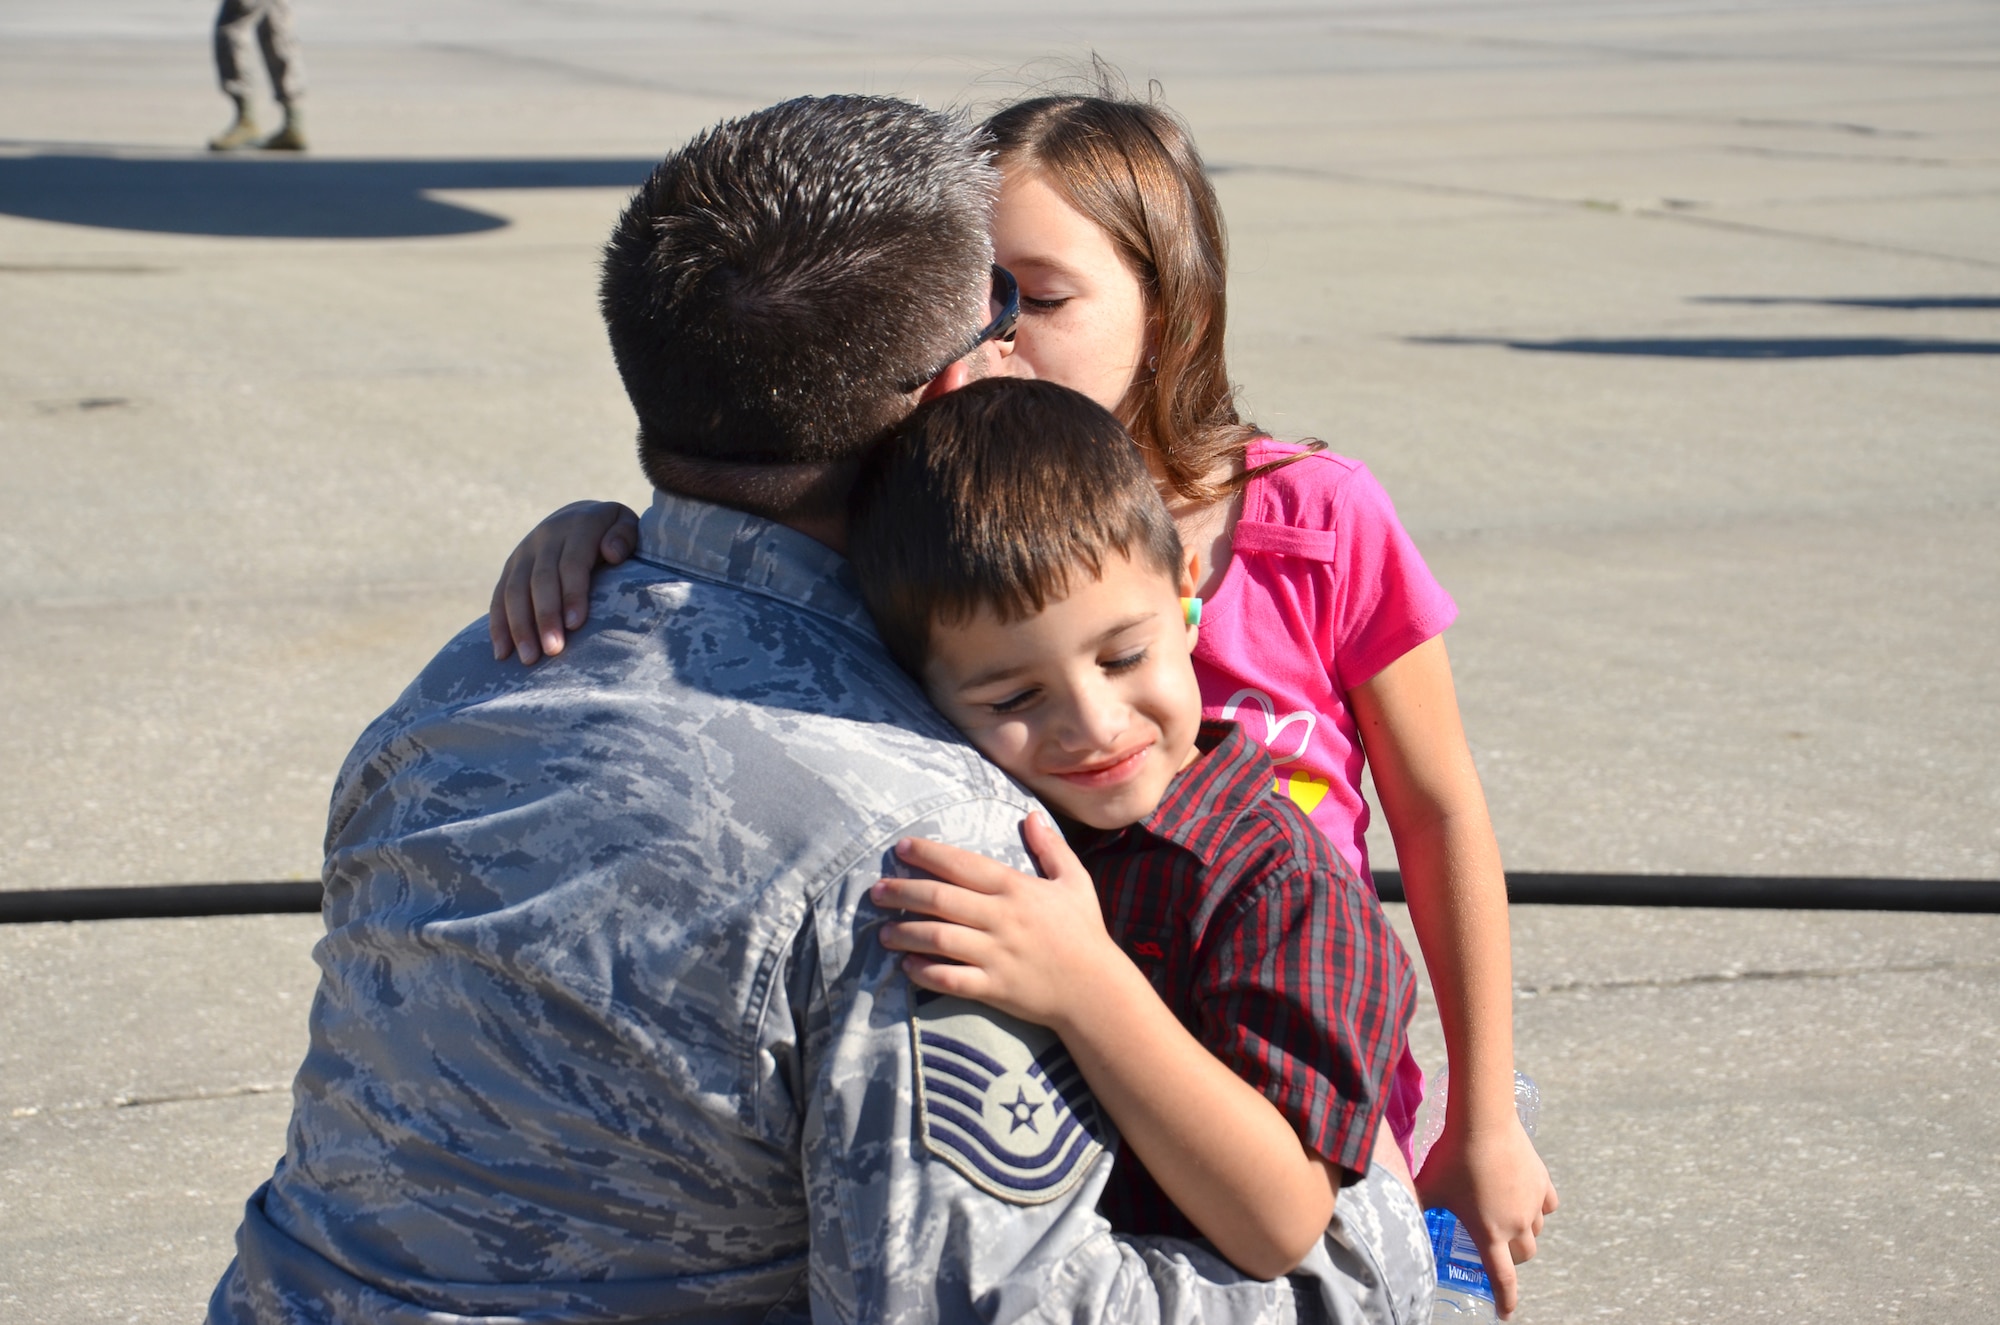 Master Sgt. Joel Lindsey, electronic integrated systems supervisor, 920th Rescue Wing, Patrick Air Force Base, Fla., gives his daughter and son a hug and kiss Jan 25. Lindsey is one of approximately 60 Rescue Airmen deploying to the Horn of Africa for 120 days to support the ongoing search and rescue and humanitarian relief efforts there. (U.S. Air Force photo/Senior Airmen Natasha Dowridge)